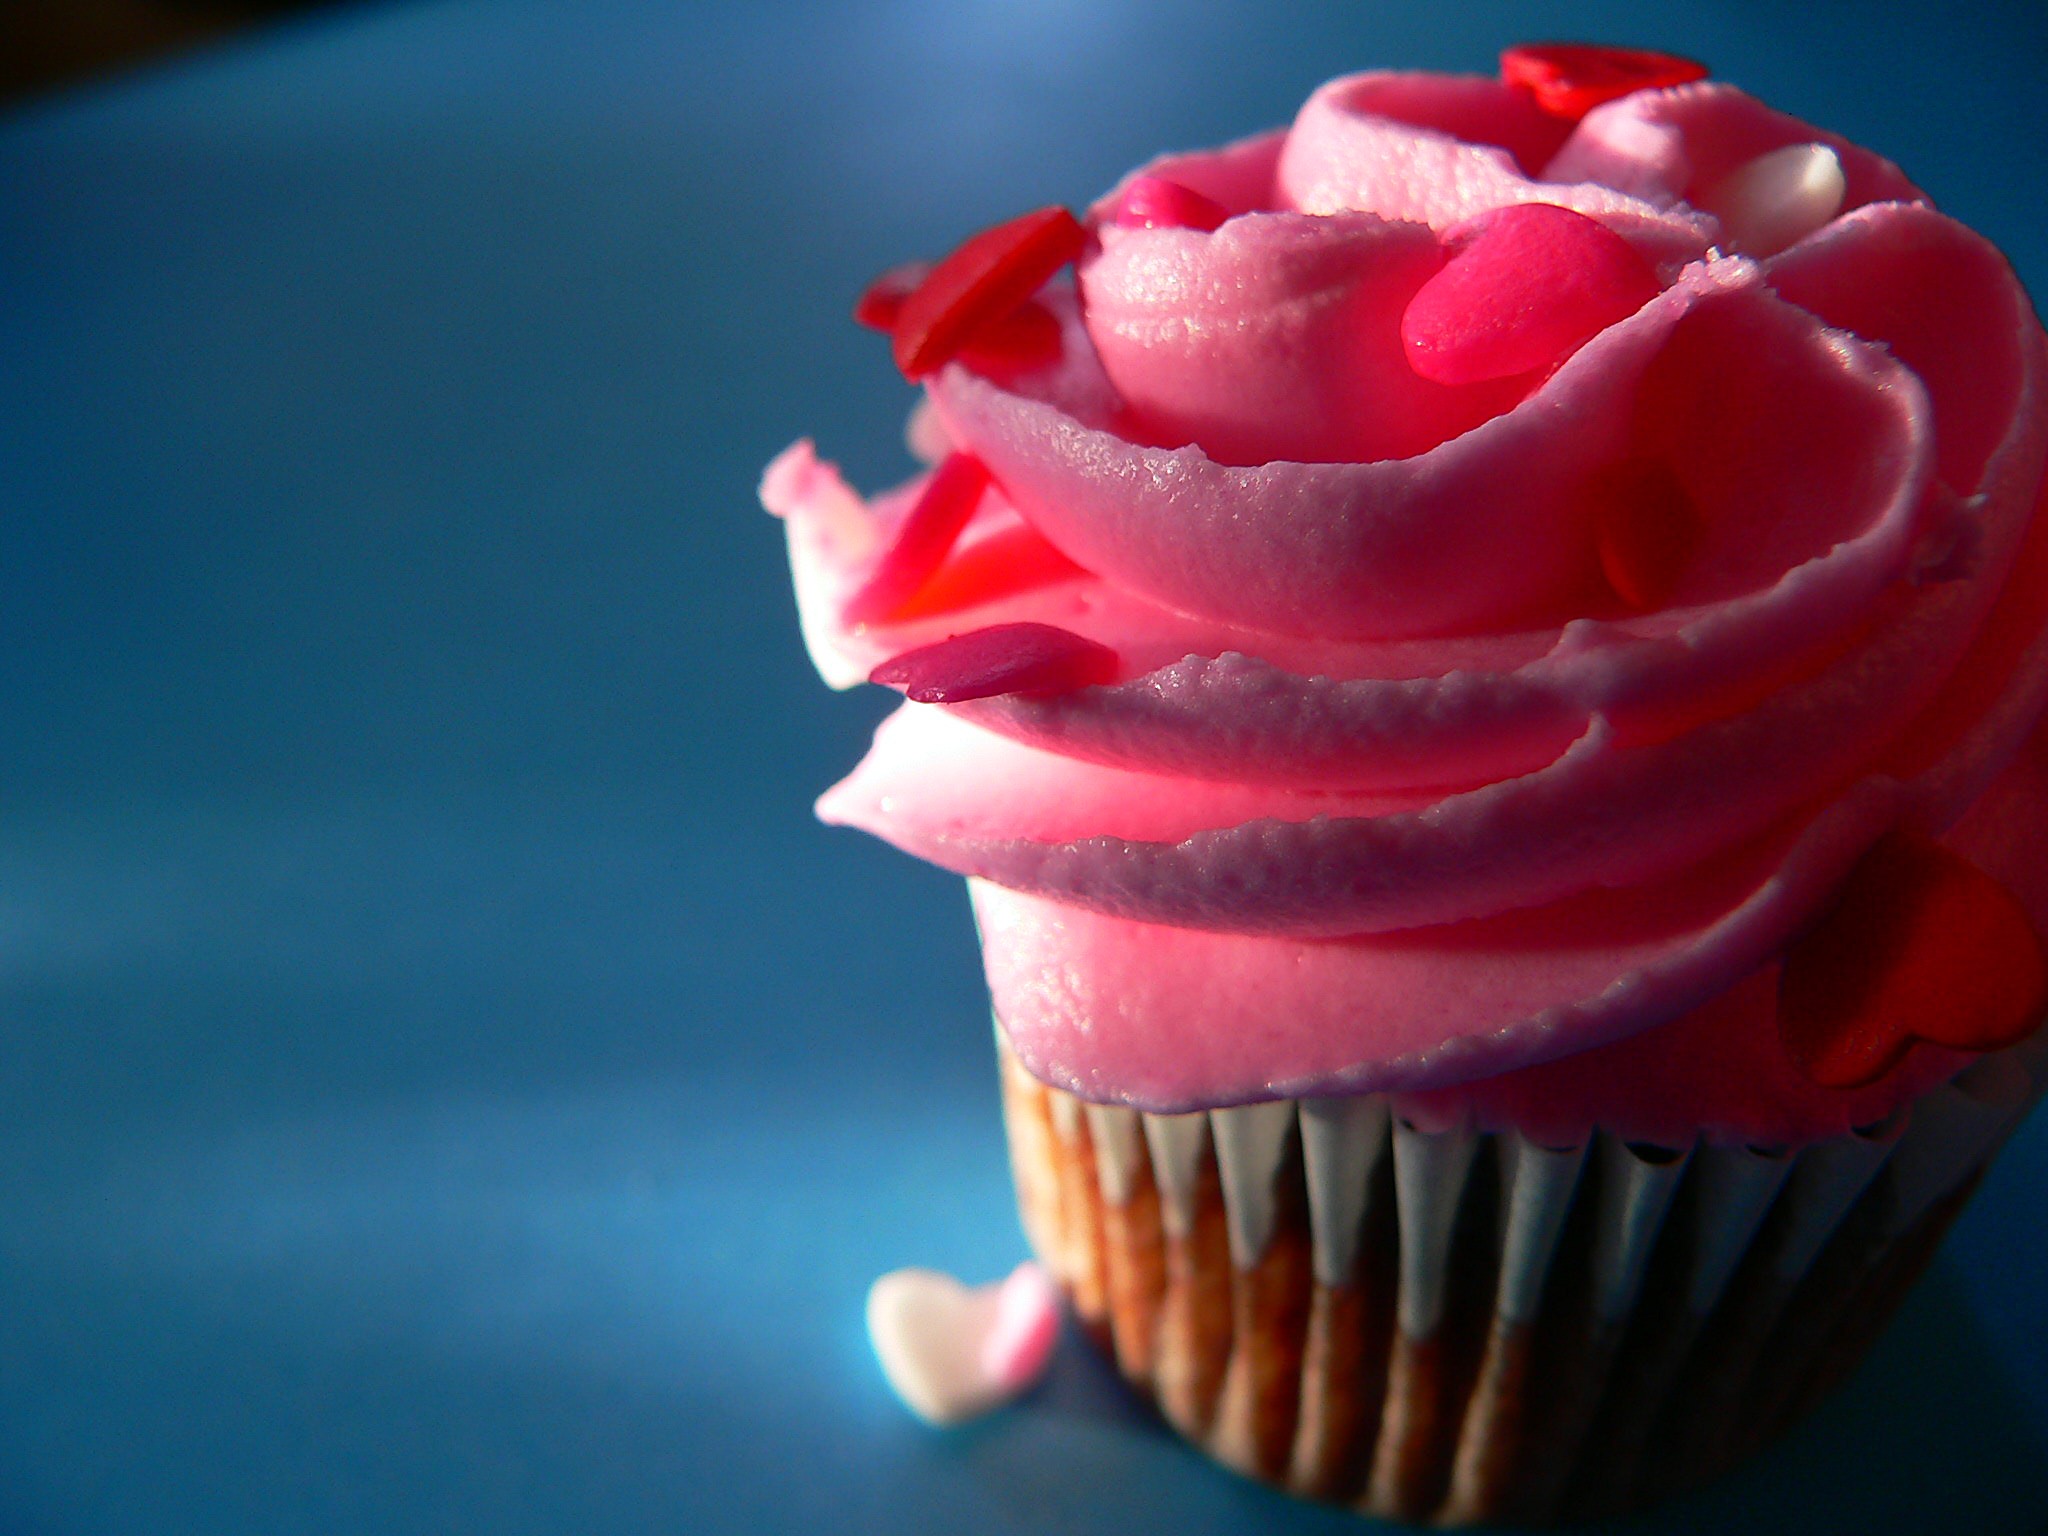 One Response To HD Wallpaper Sweet Cupcakes